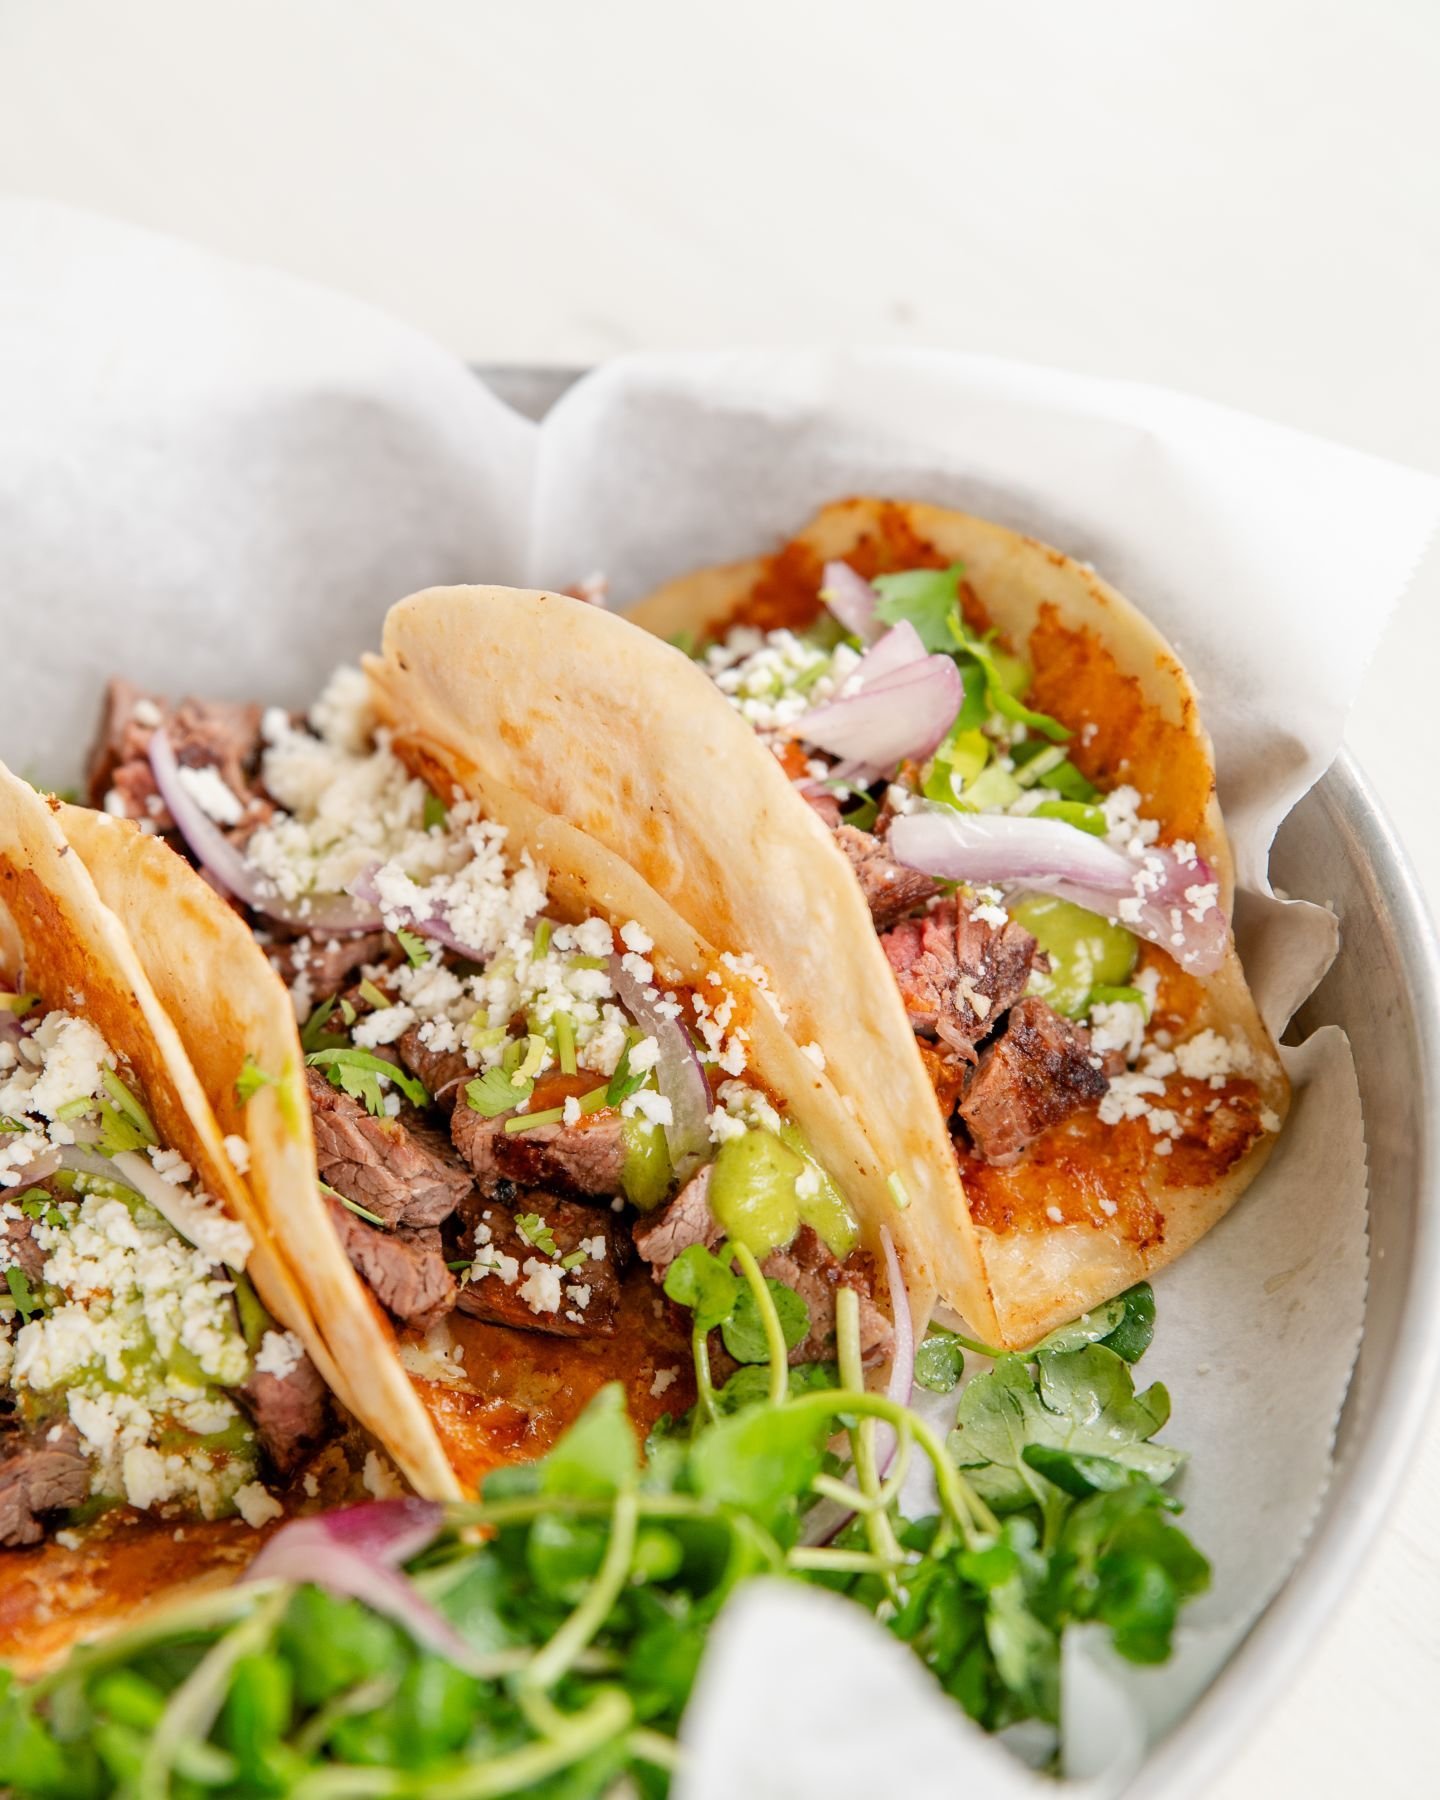 TGITT -- Thank God It's Taco Tuesday! 🌮

Consider this your sign to try our *NEW* Tacos Sonora! Made with all-natural steak, grilled fundido cheese, onion, cilantro, salsa aguacate, roasted chili de arbol, and watercress salad.